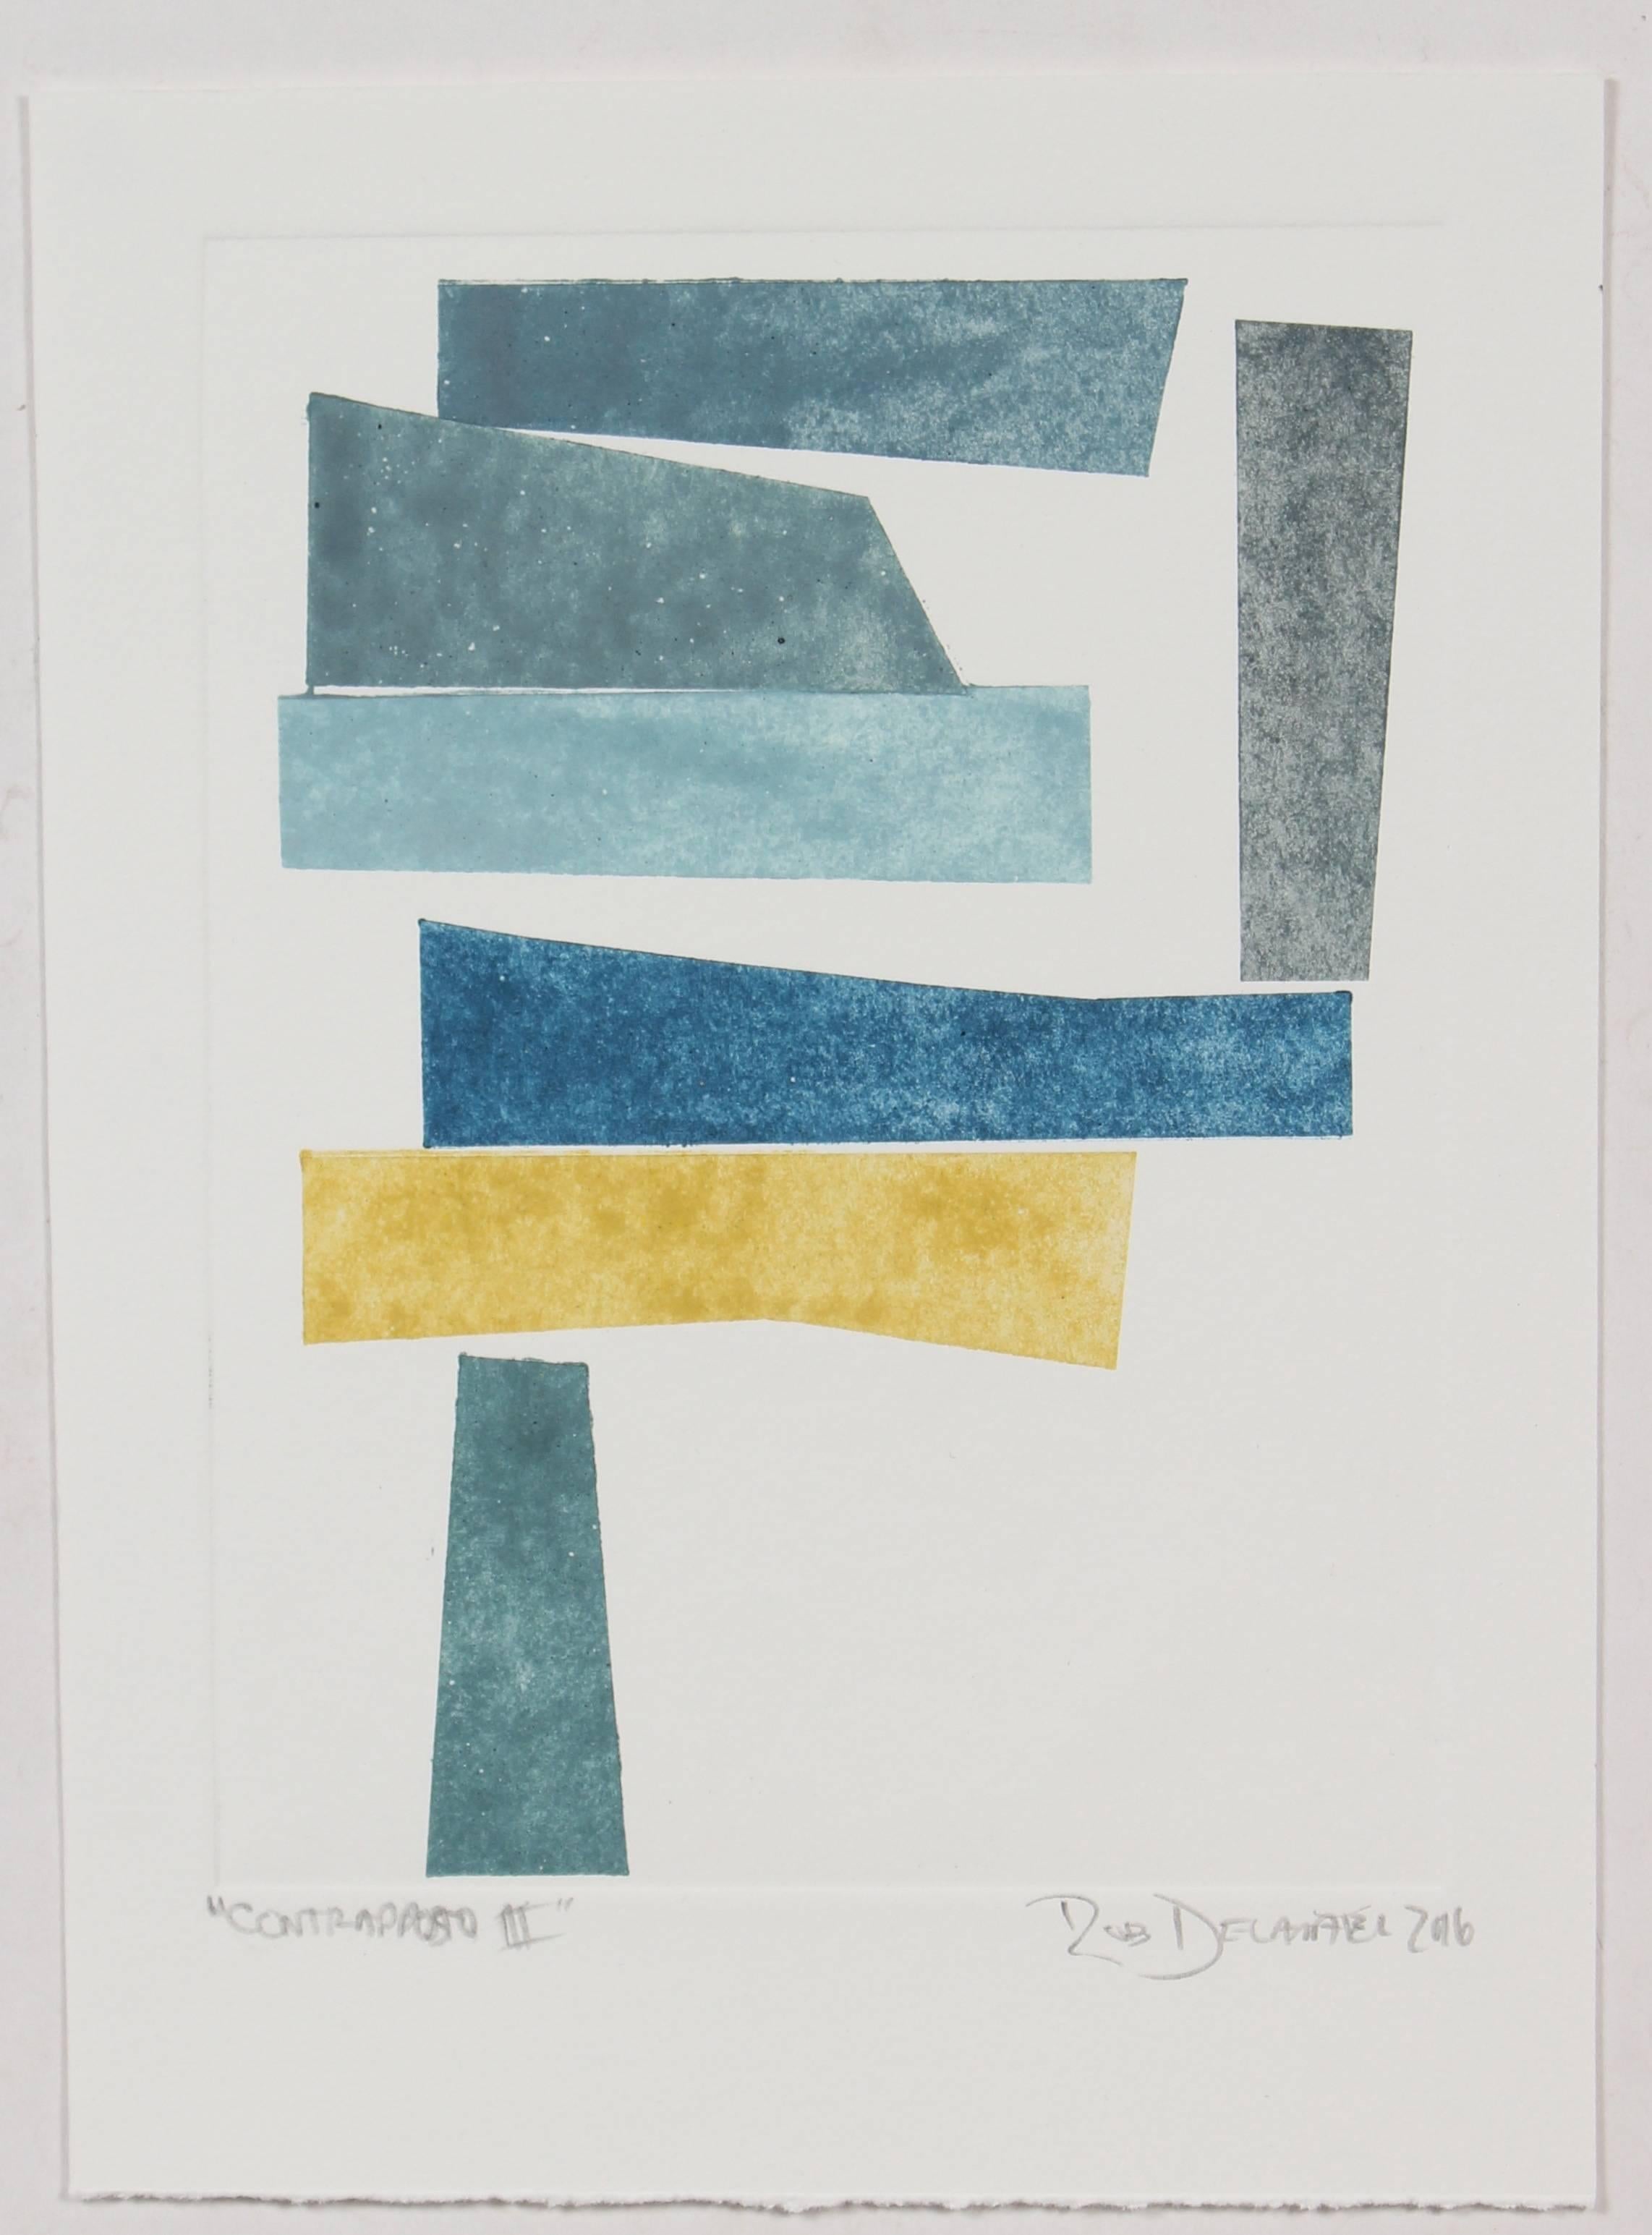 Rob Delamater Abstract Print - "Contrapposto III" Monotype